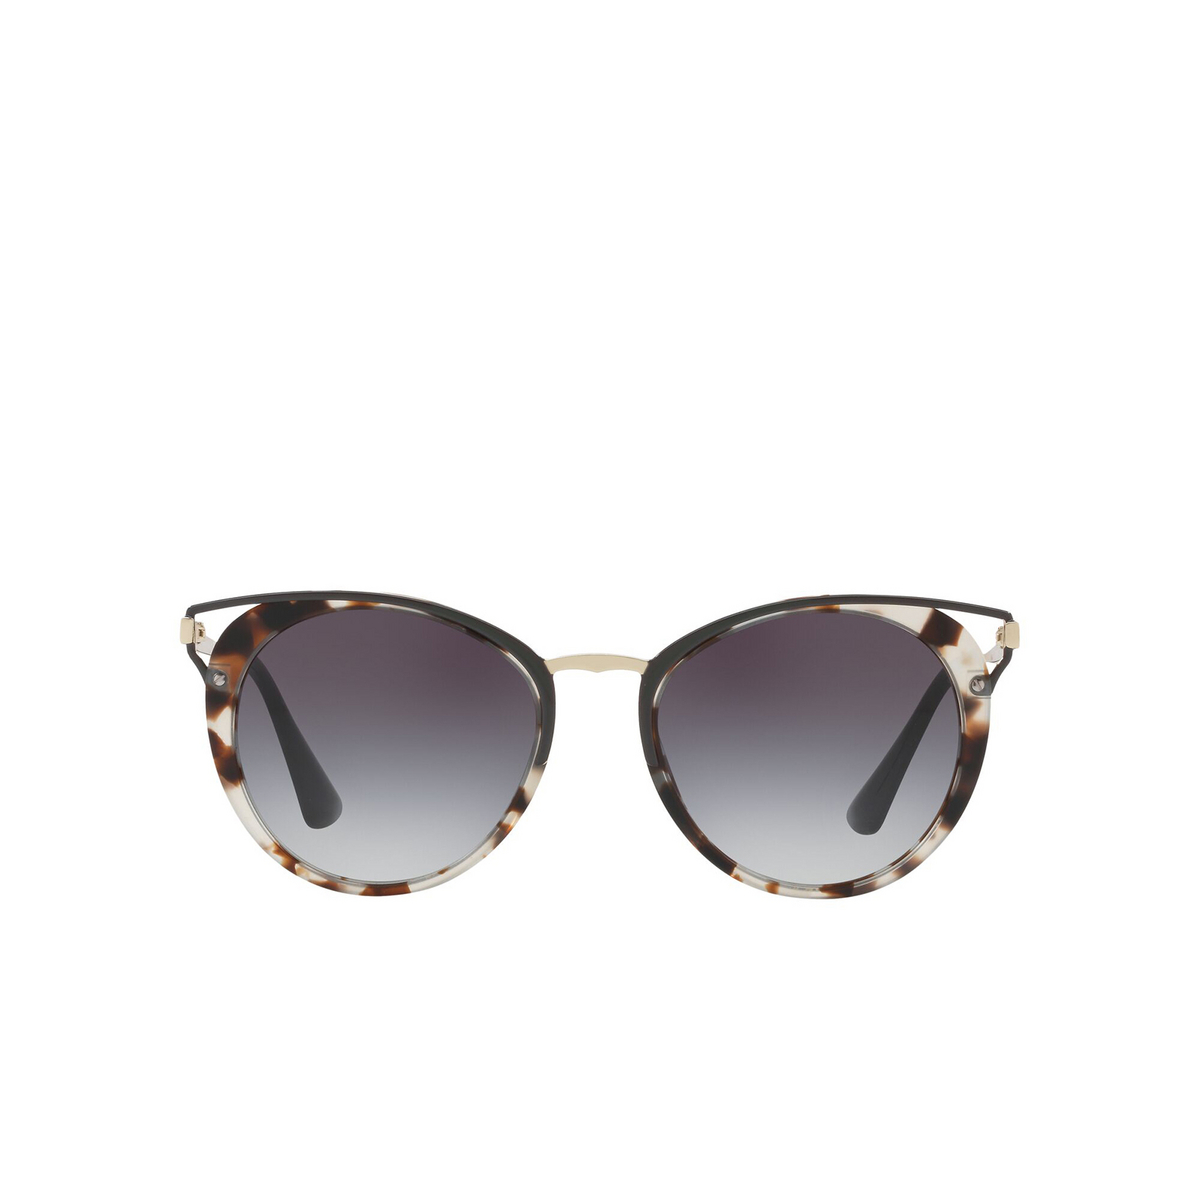 Prada® Cat-eye Sunglasses: Catwalk PR 66TSF color Spotted Opal Brown UAO5D1 - front view.